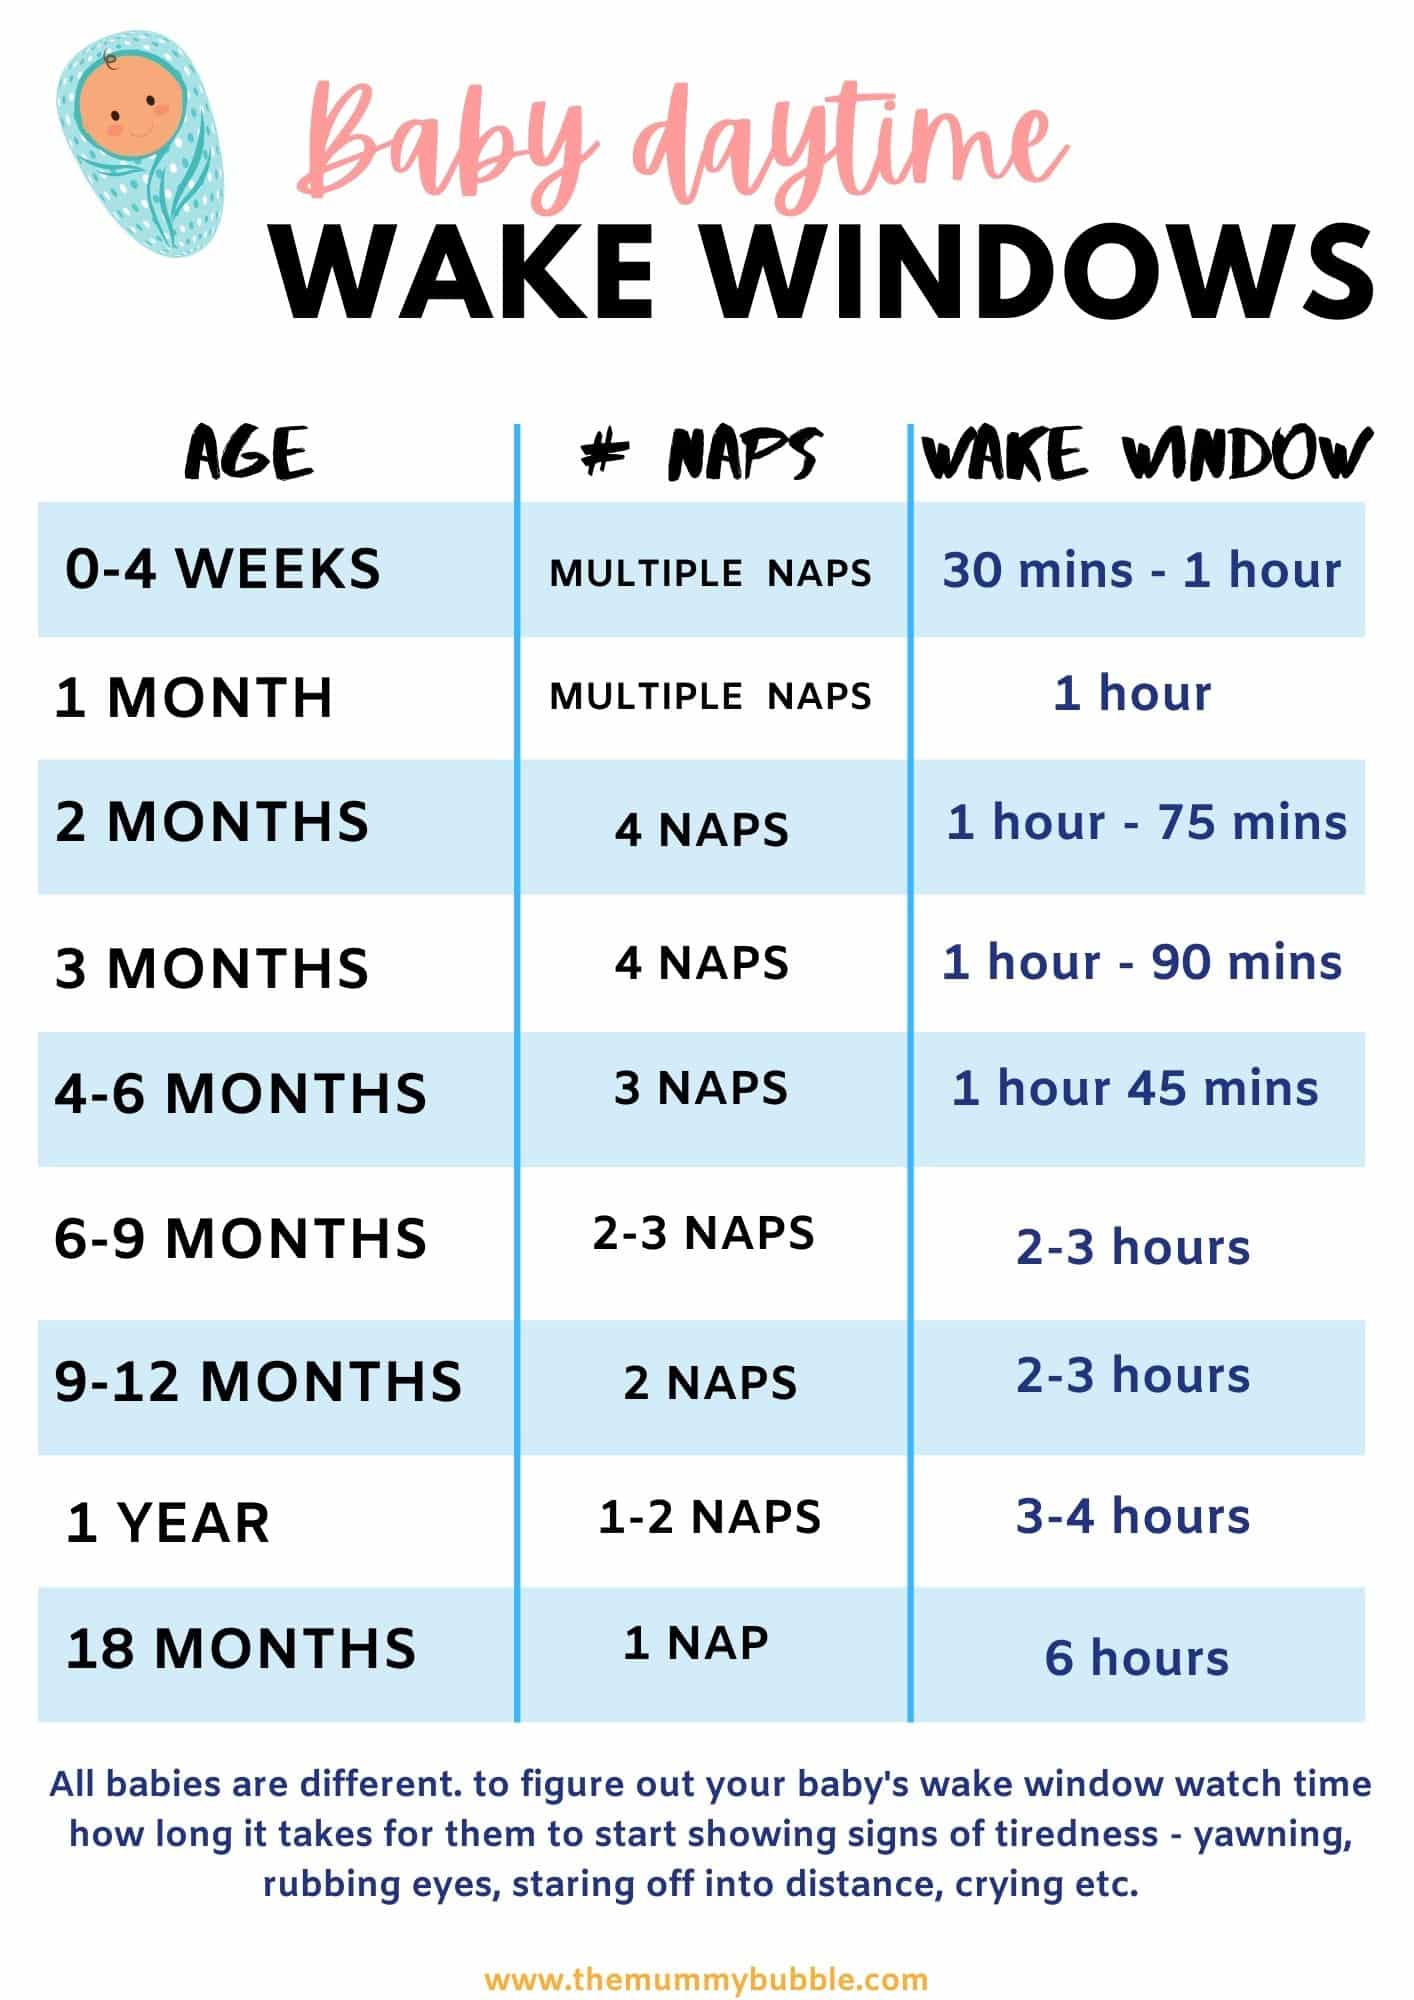 Baby's wake window by age chart guide 